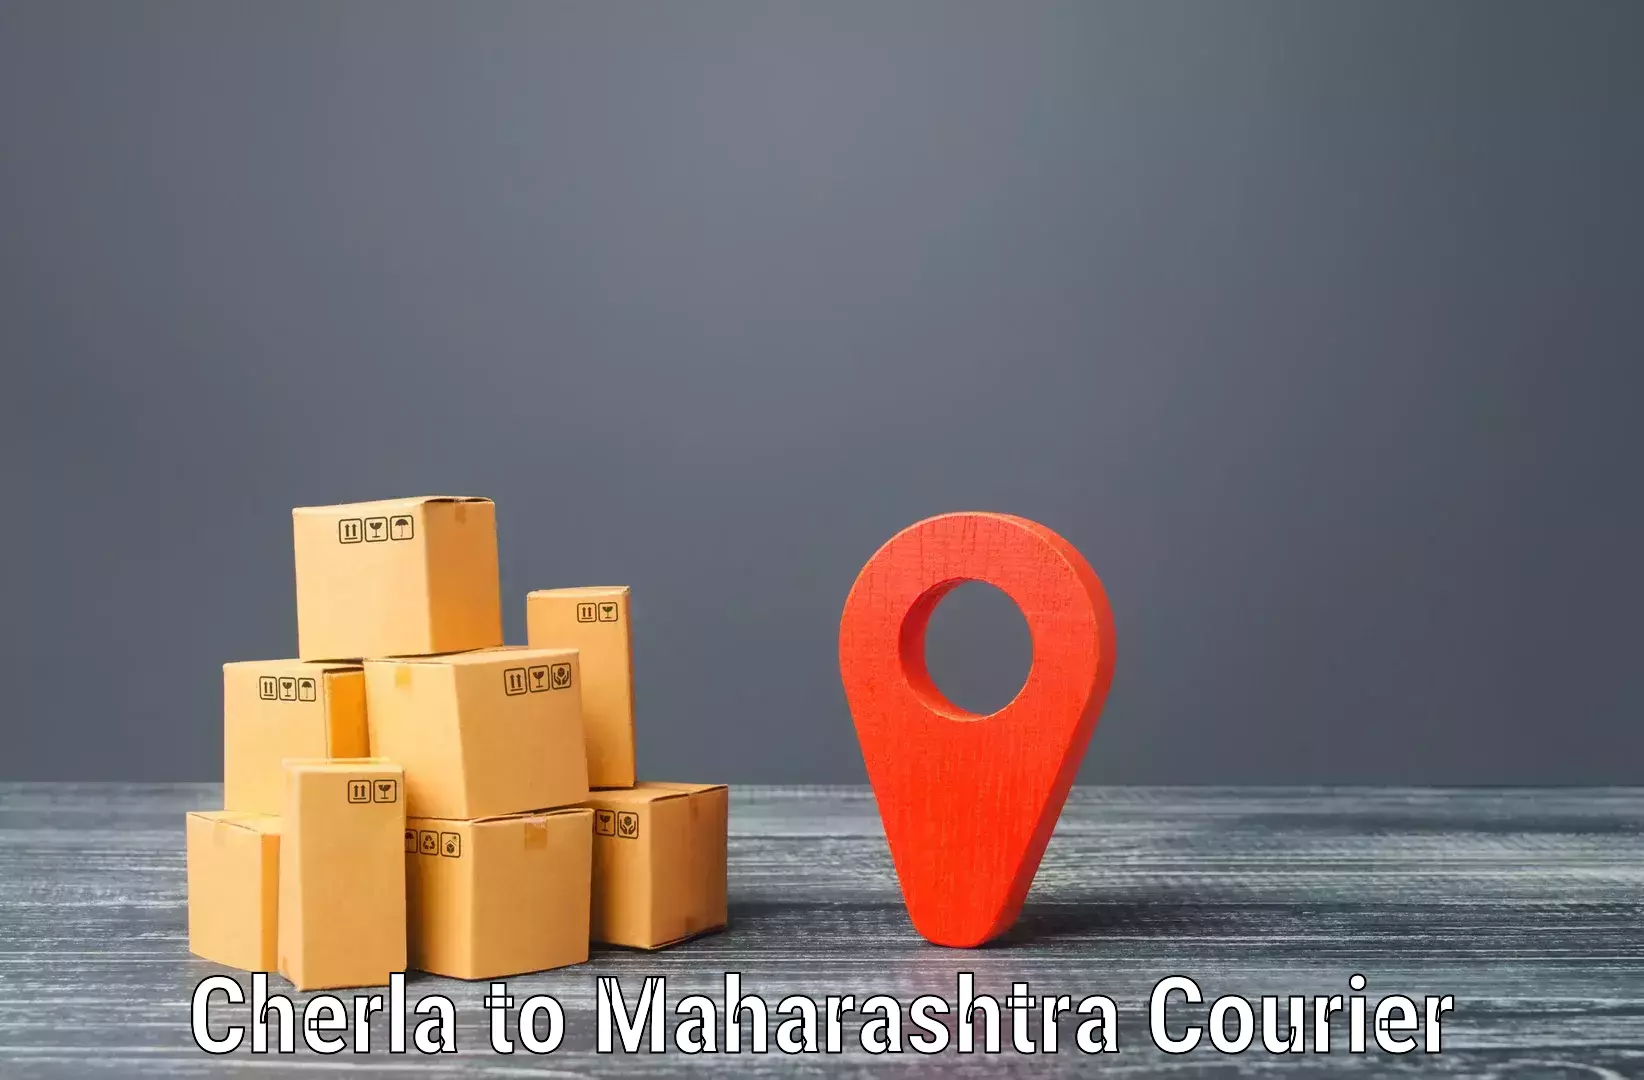 Overnight delivery services Cherla to Nagpur